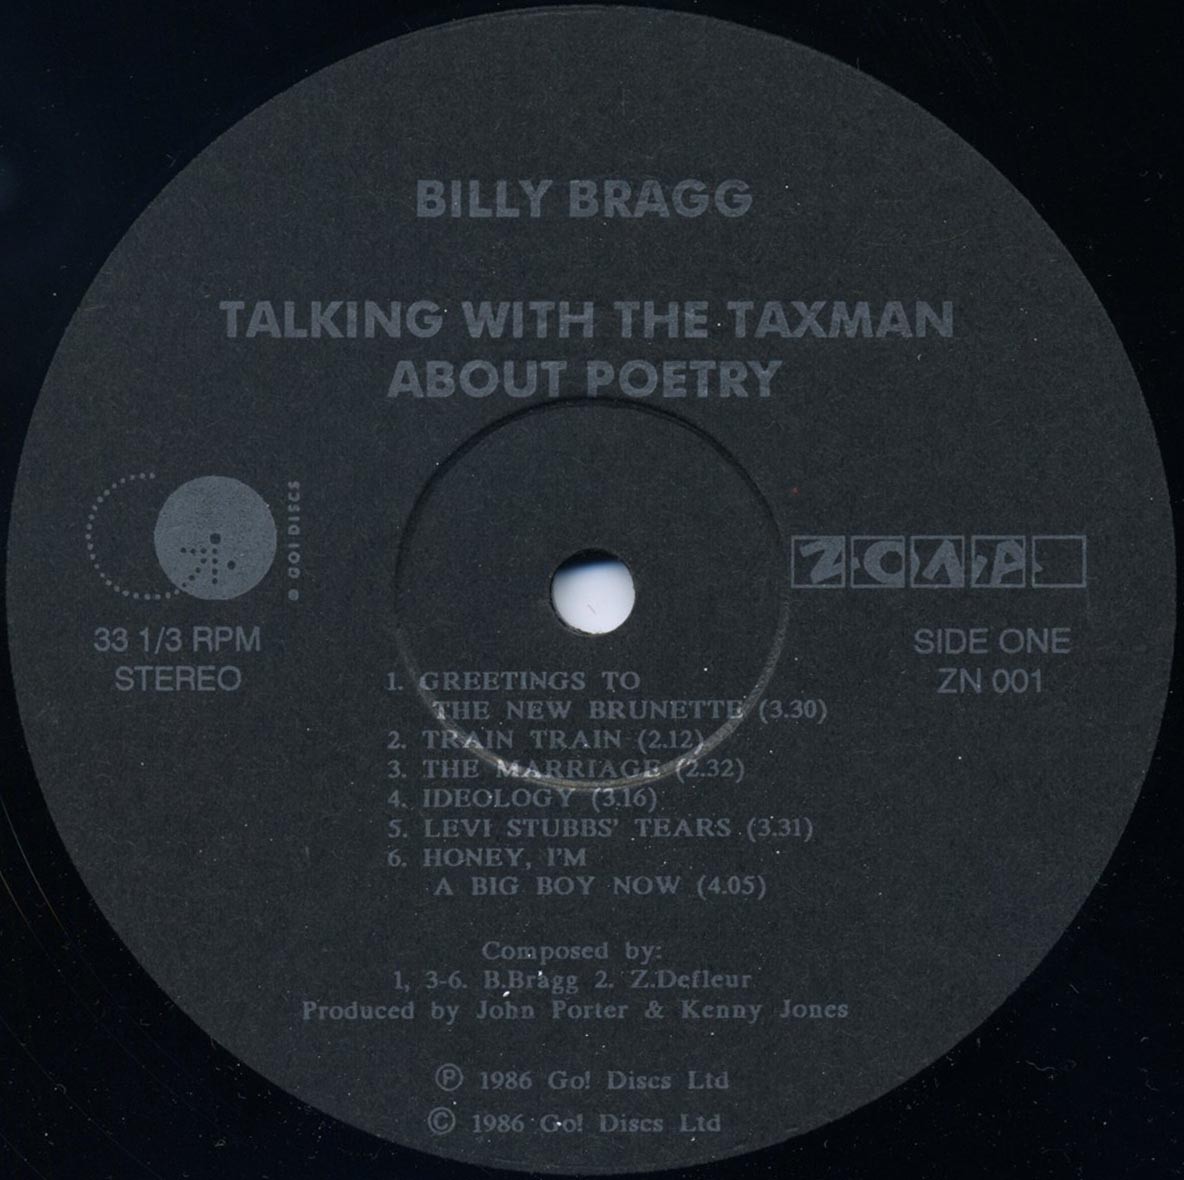 Billy Bragg. Talking With The Taxman About Poetry